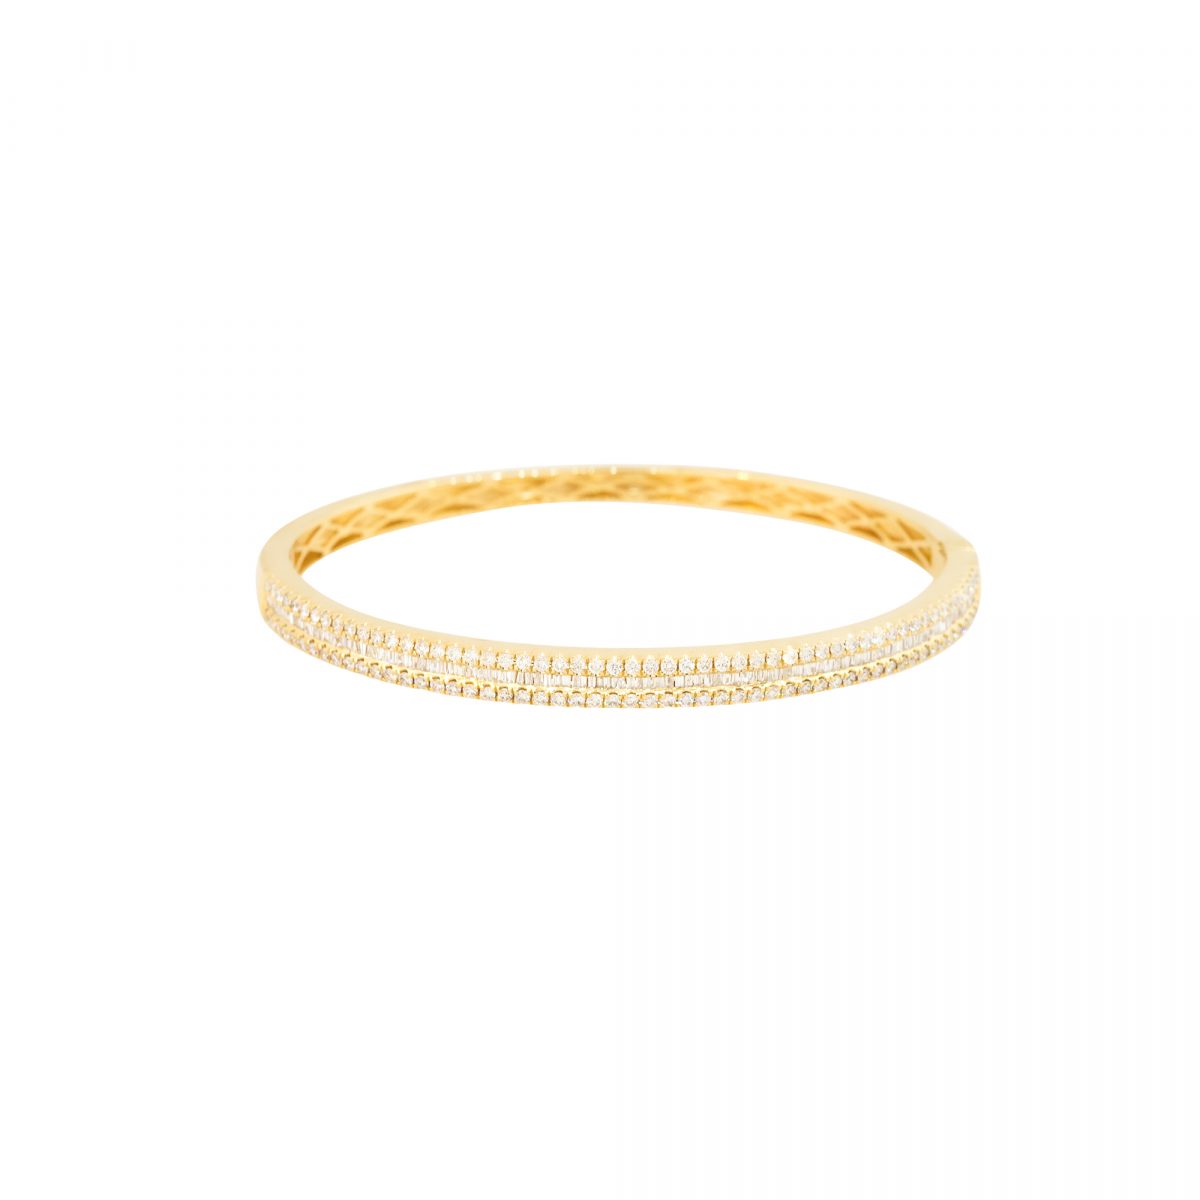 18k Yellow Gold 1.70ctw Round and Baguette Cut Diamond Bangle